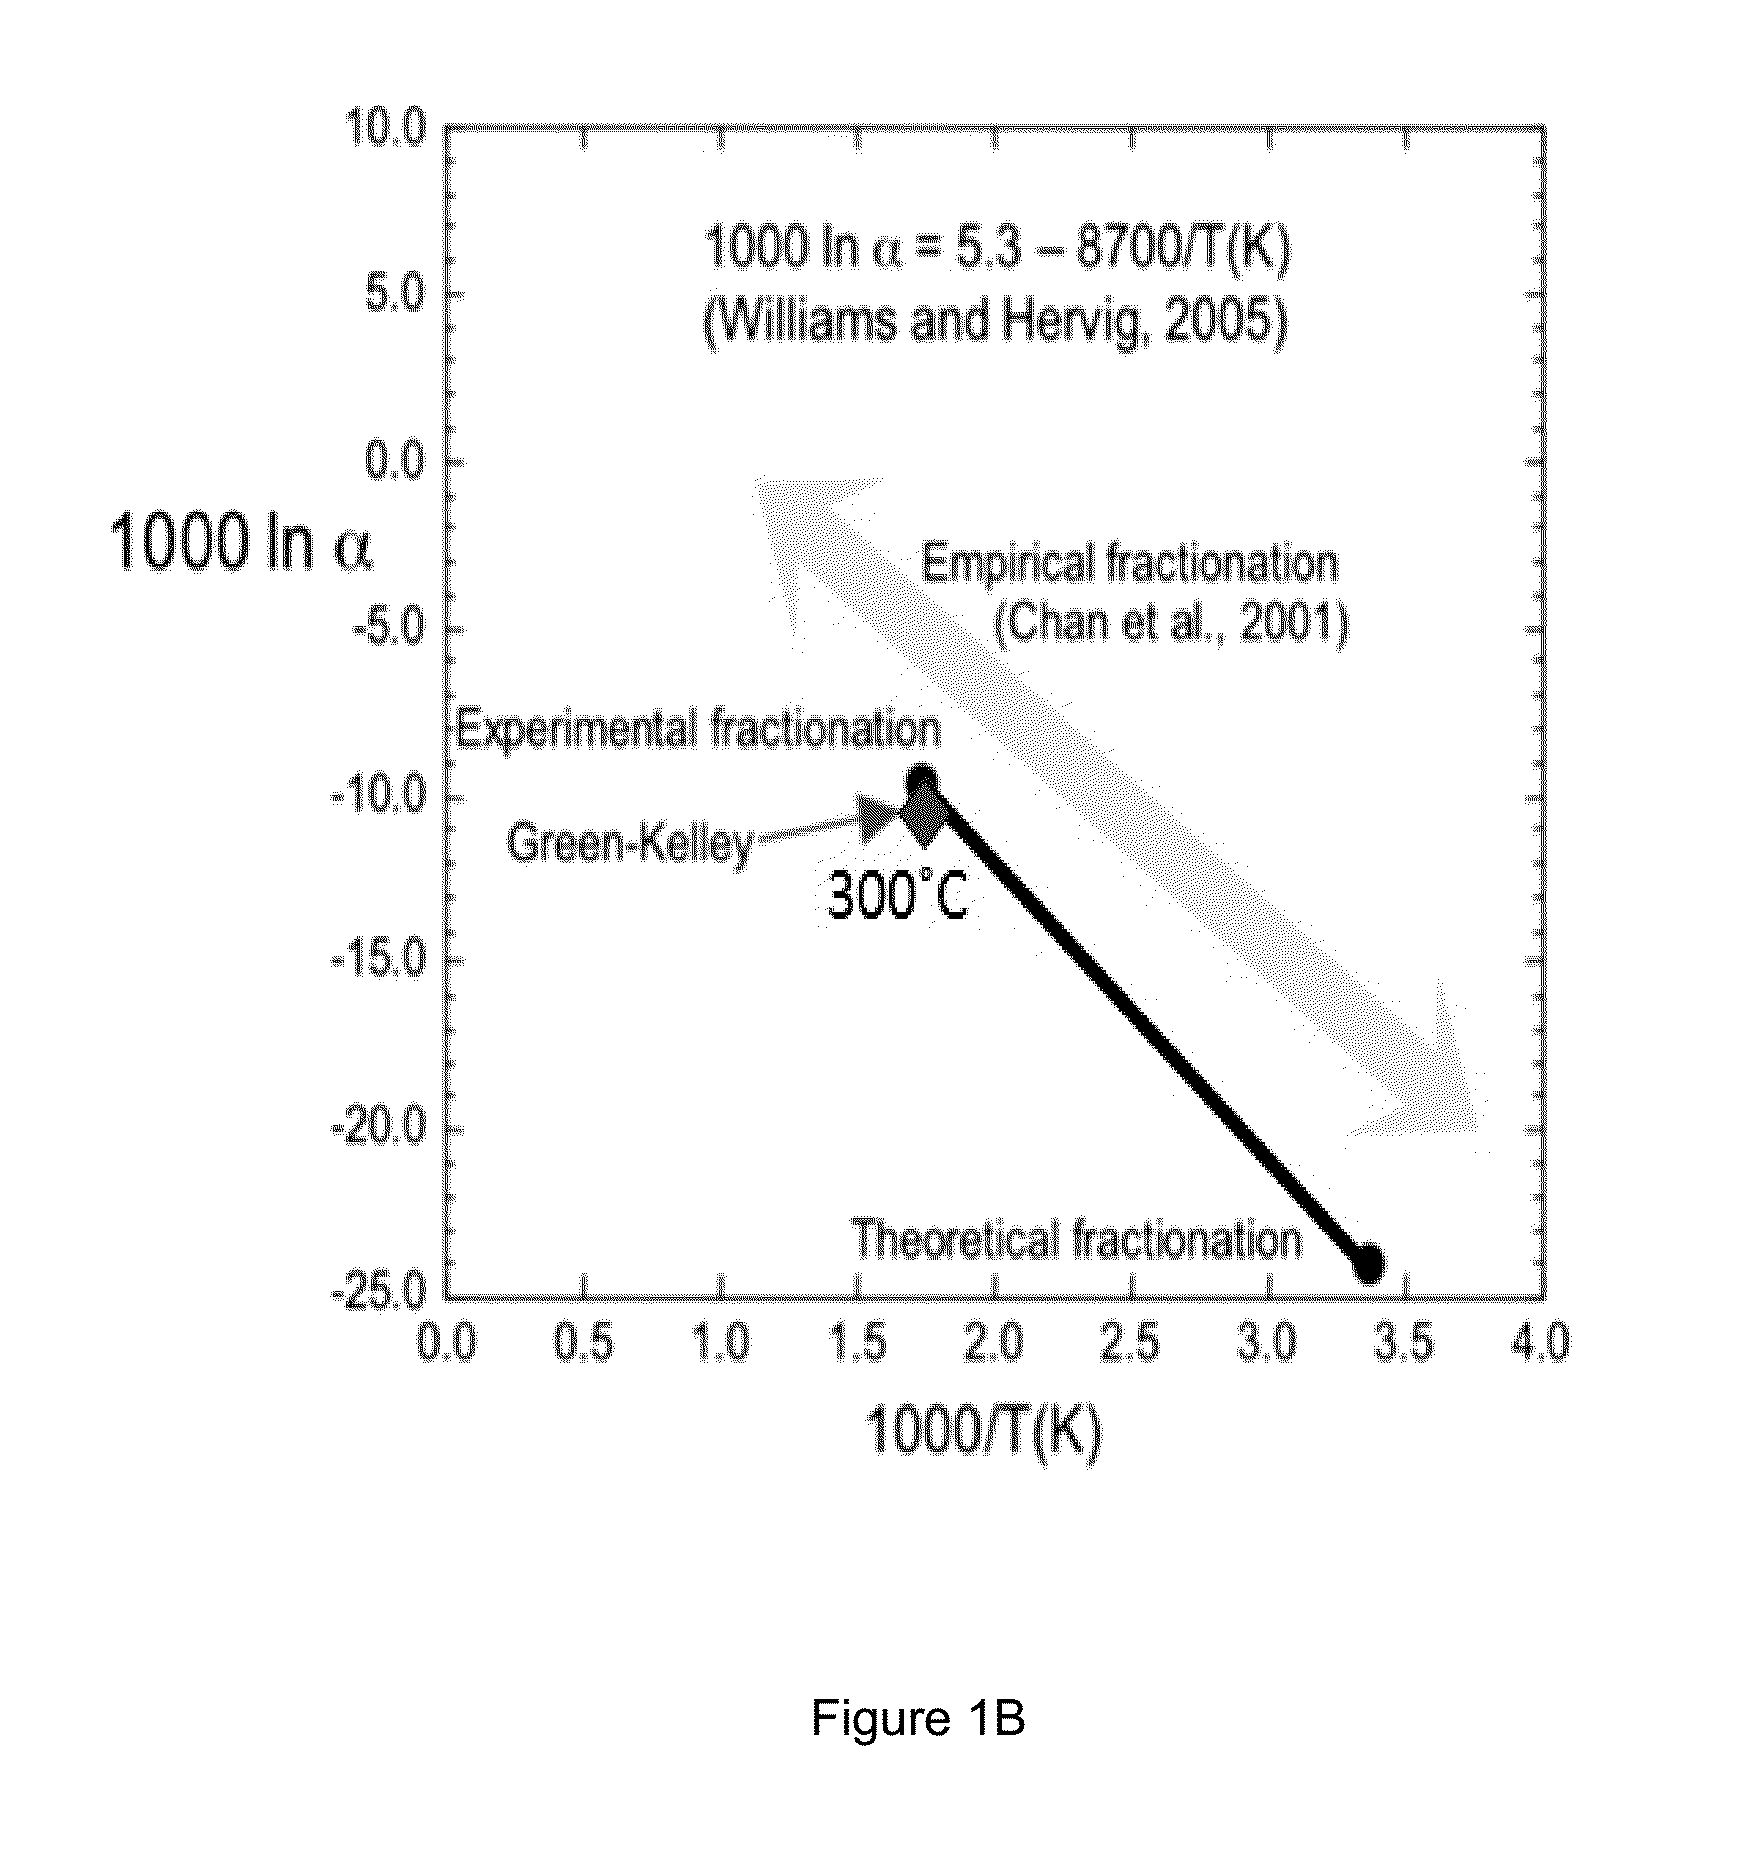 Boron And Lithium Isotopic Method For Tracing Hydrocarbons And Their By-Products